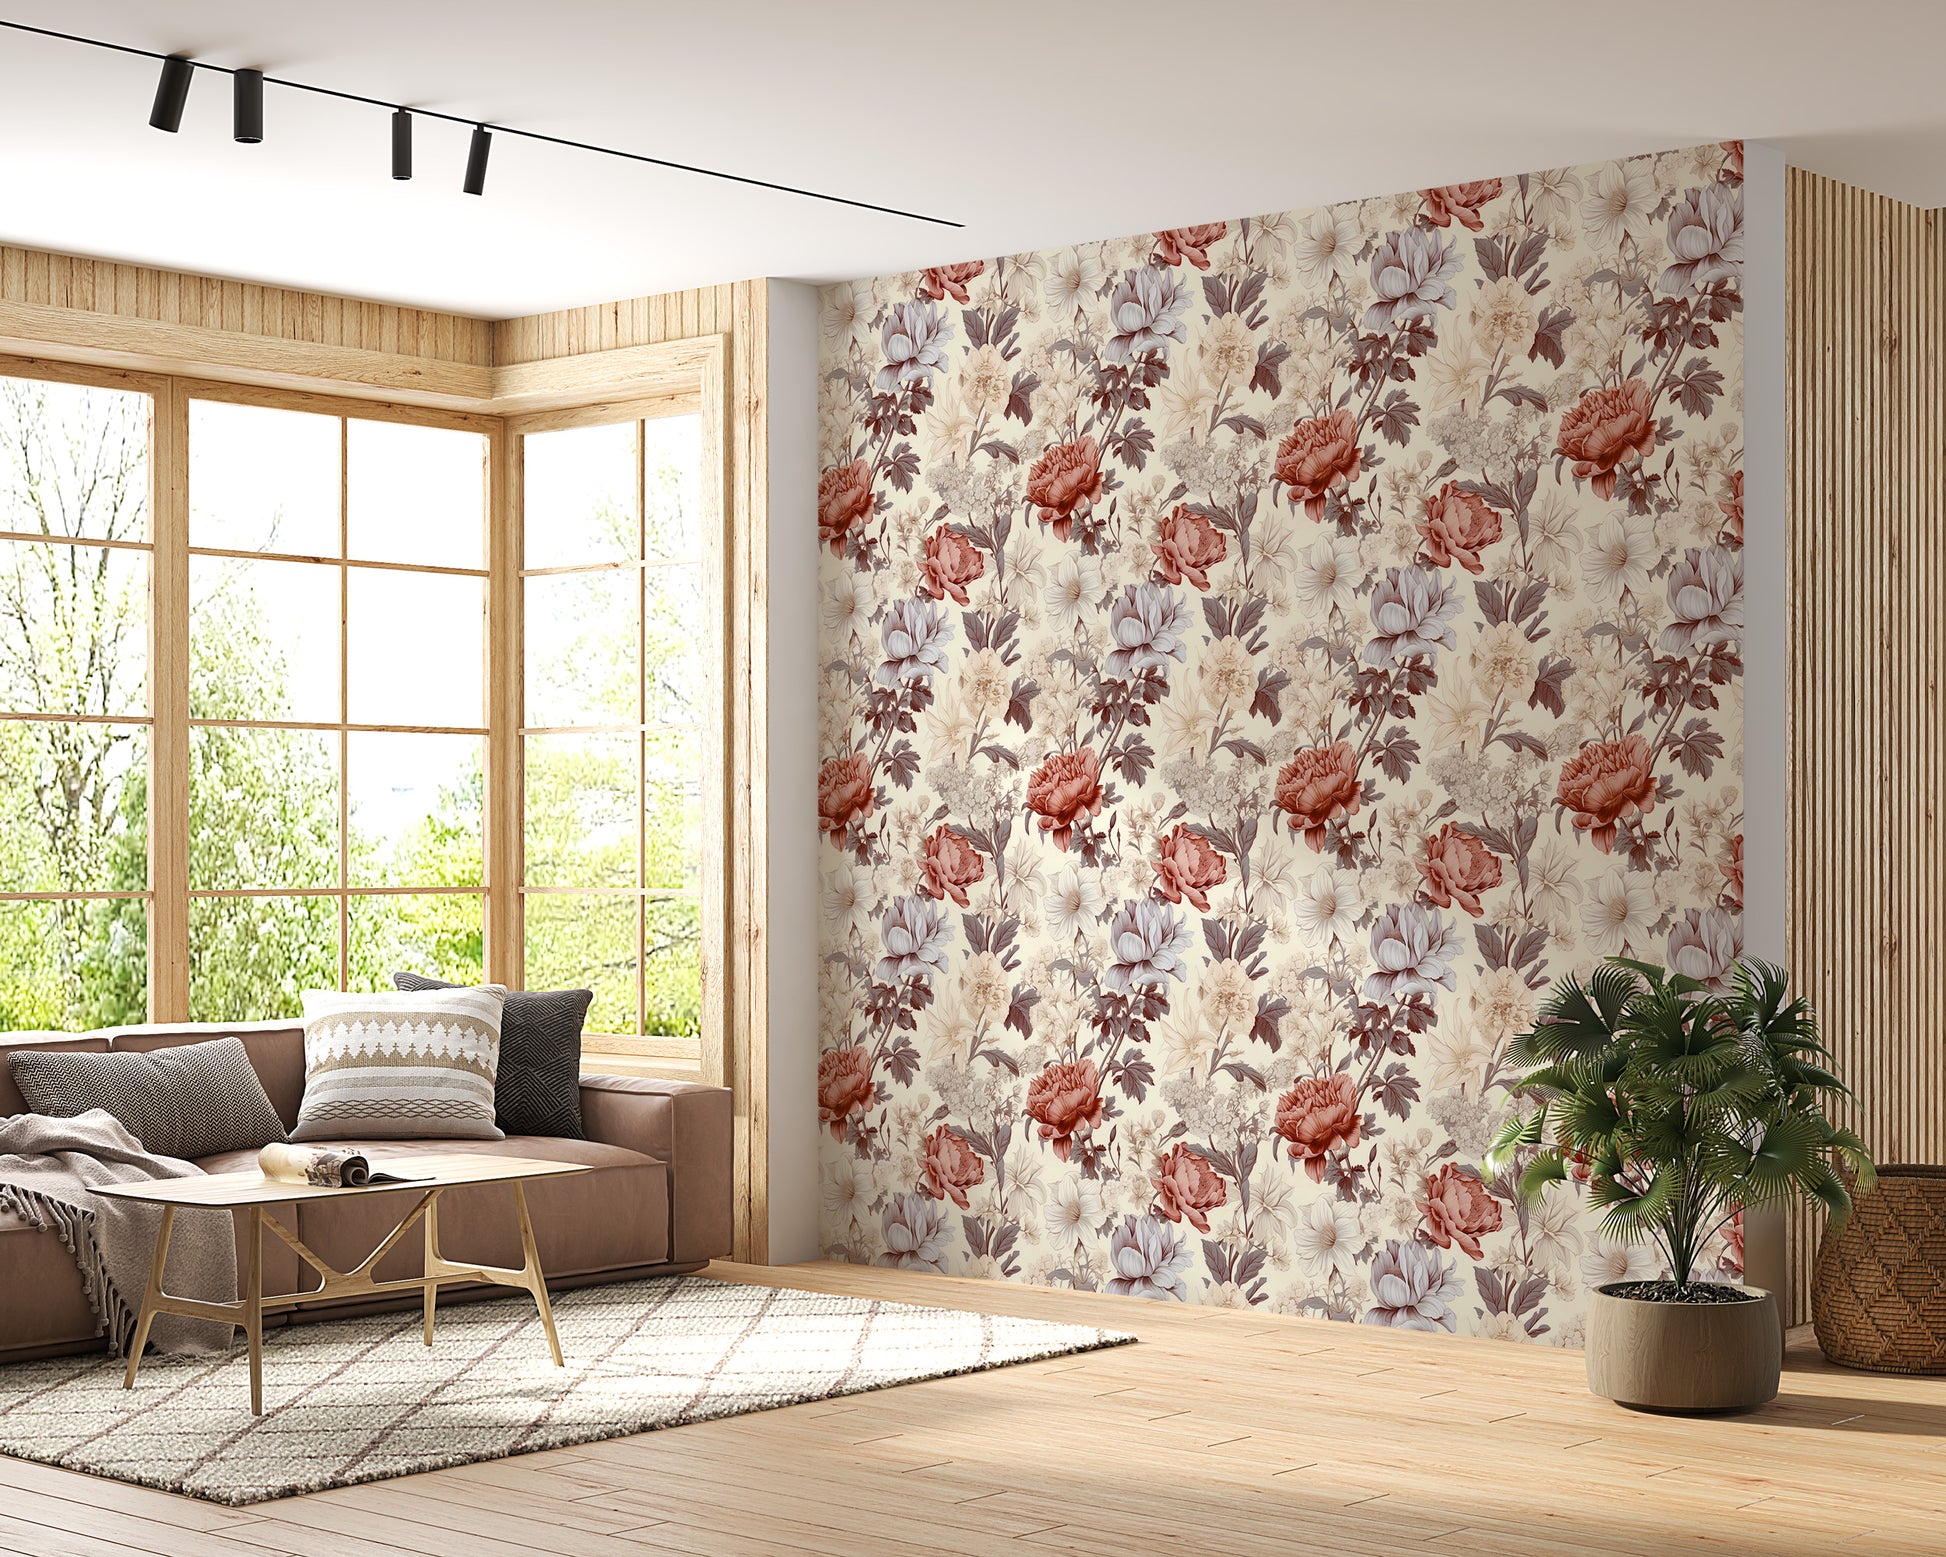 Vintage Inspired Botanic Wall Covering